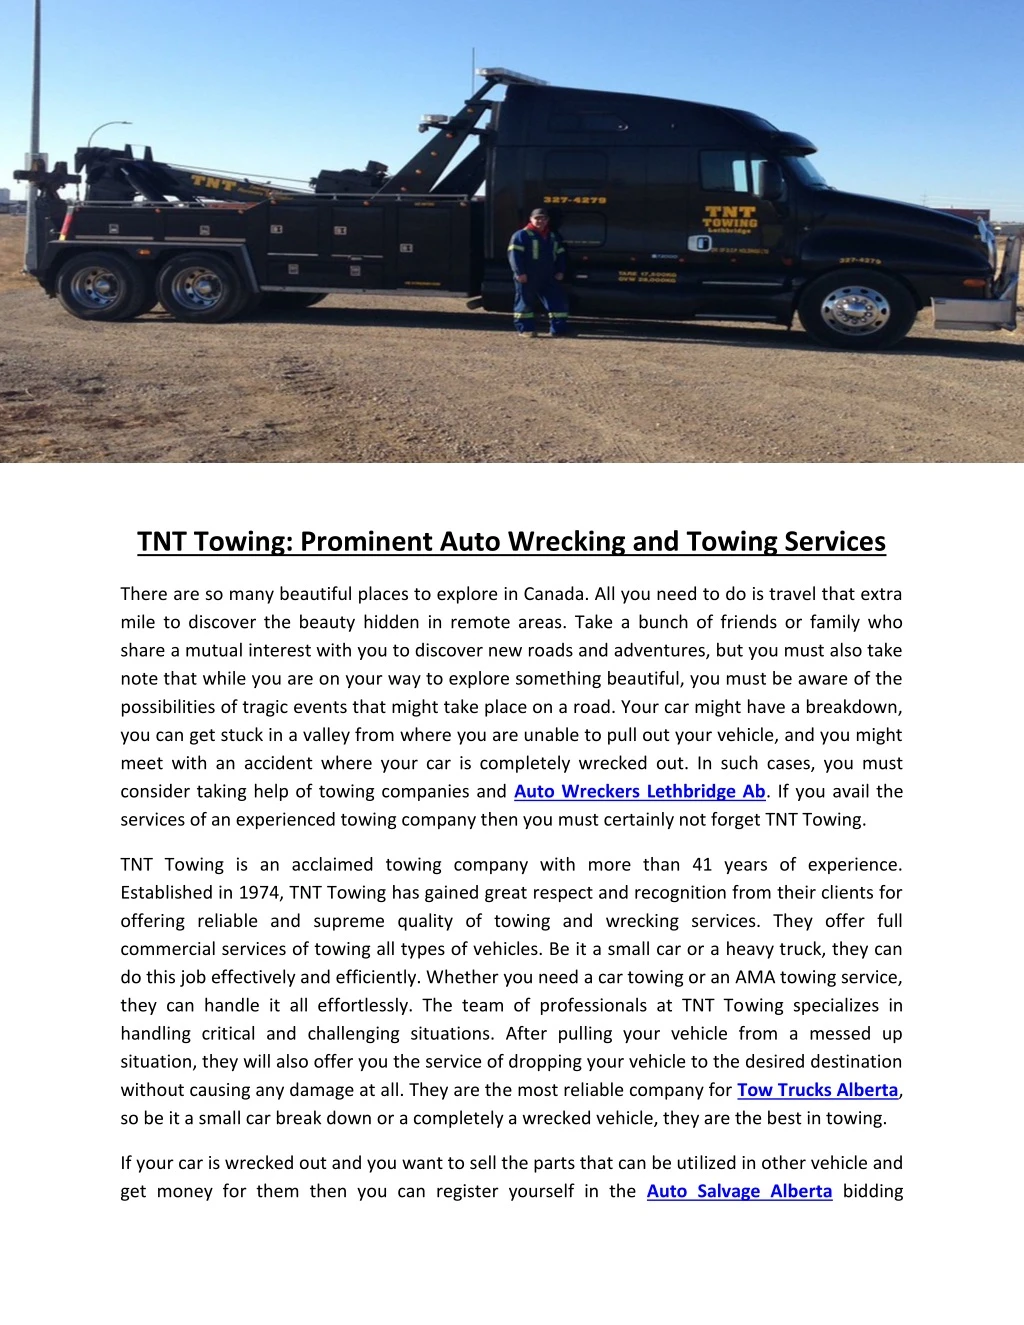 tnt towing prominent auto wrecking and towing